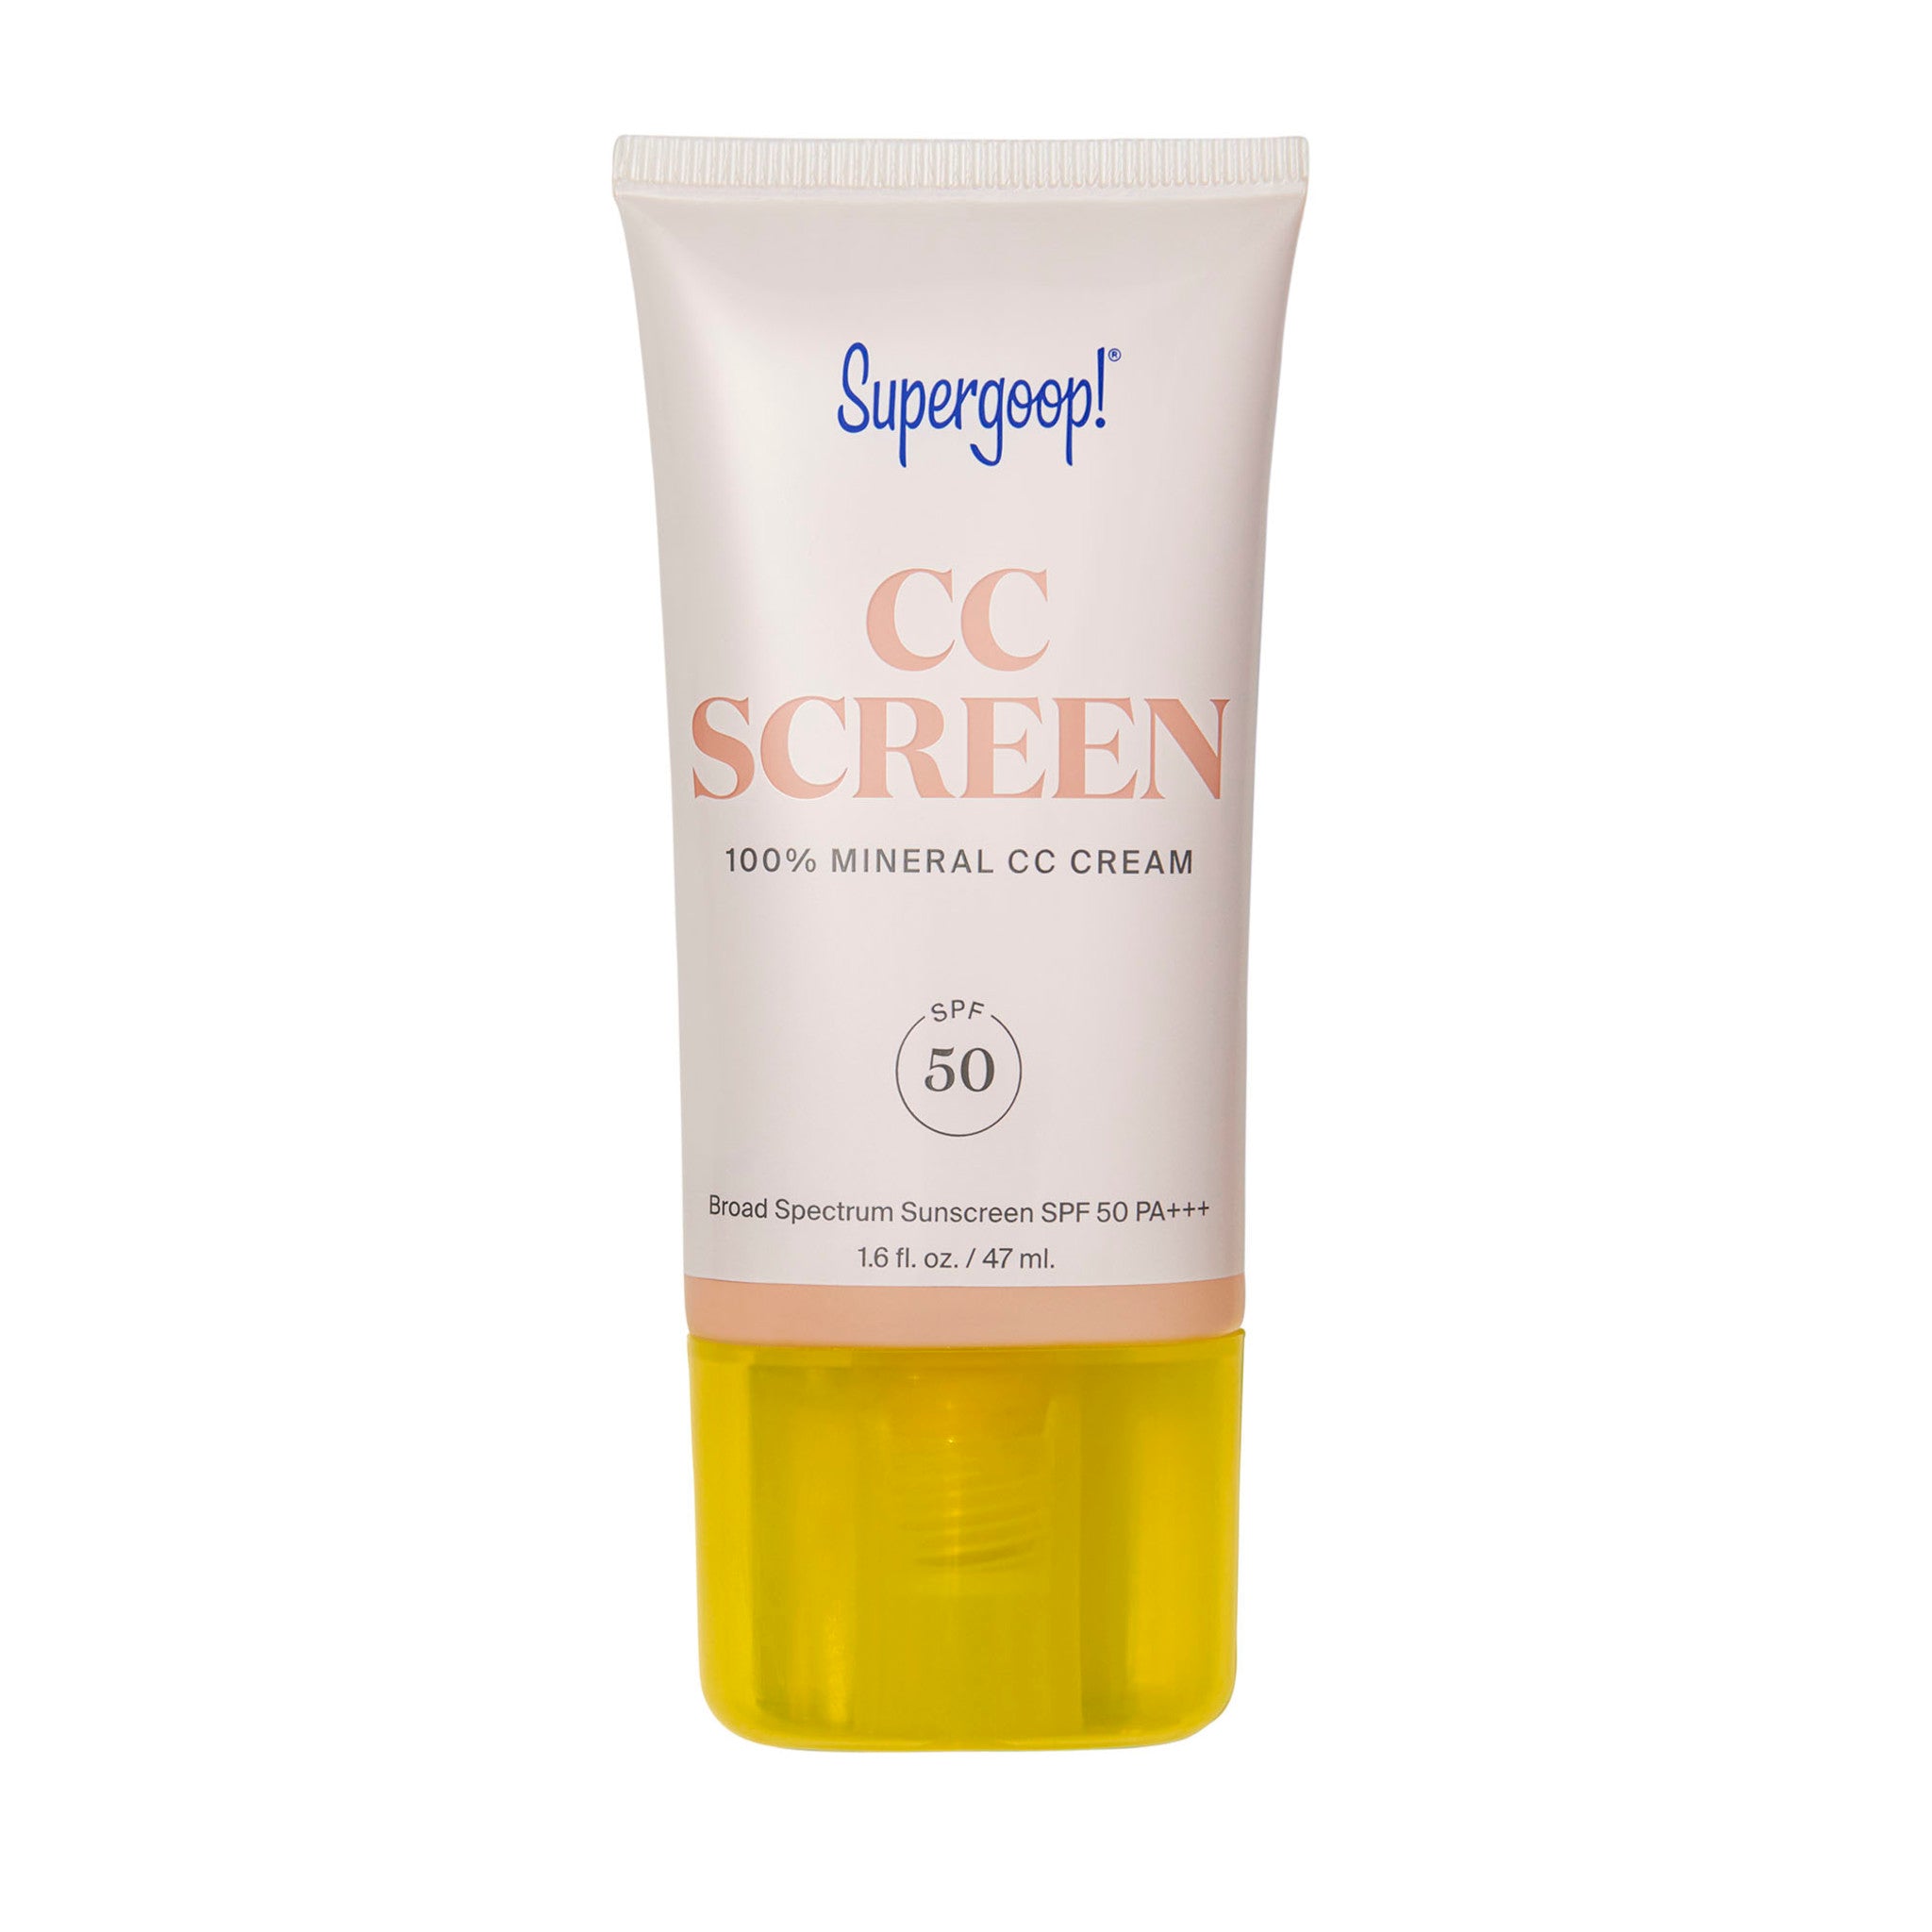 Supergoop! CC Screen 100% Mineral CC Cream SPF 50 Color/Shade variant: 100C main image. This product is for light complexions